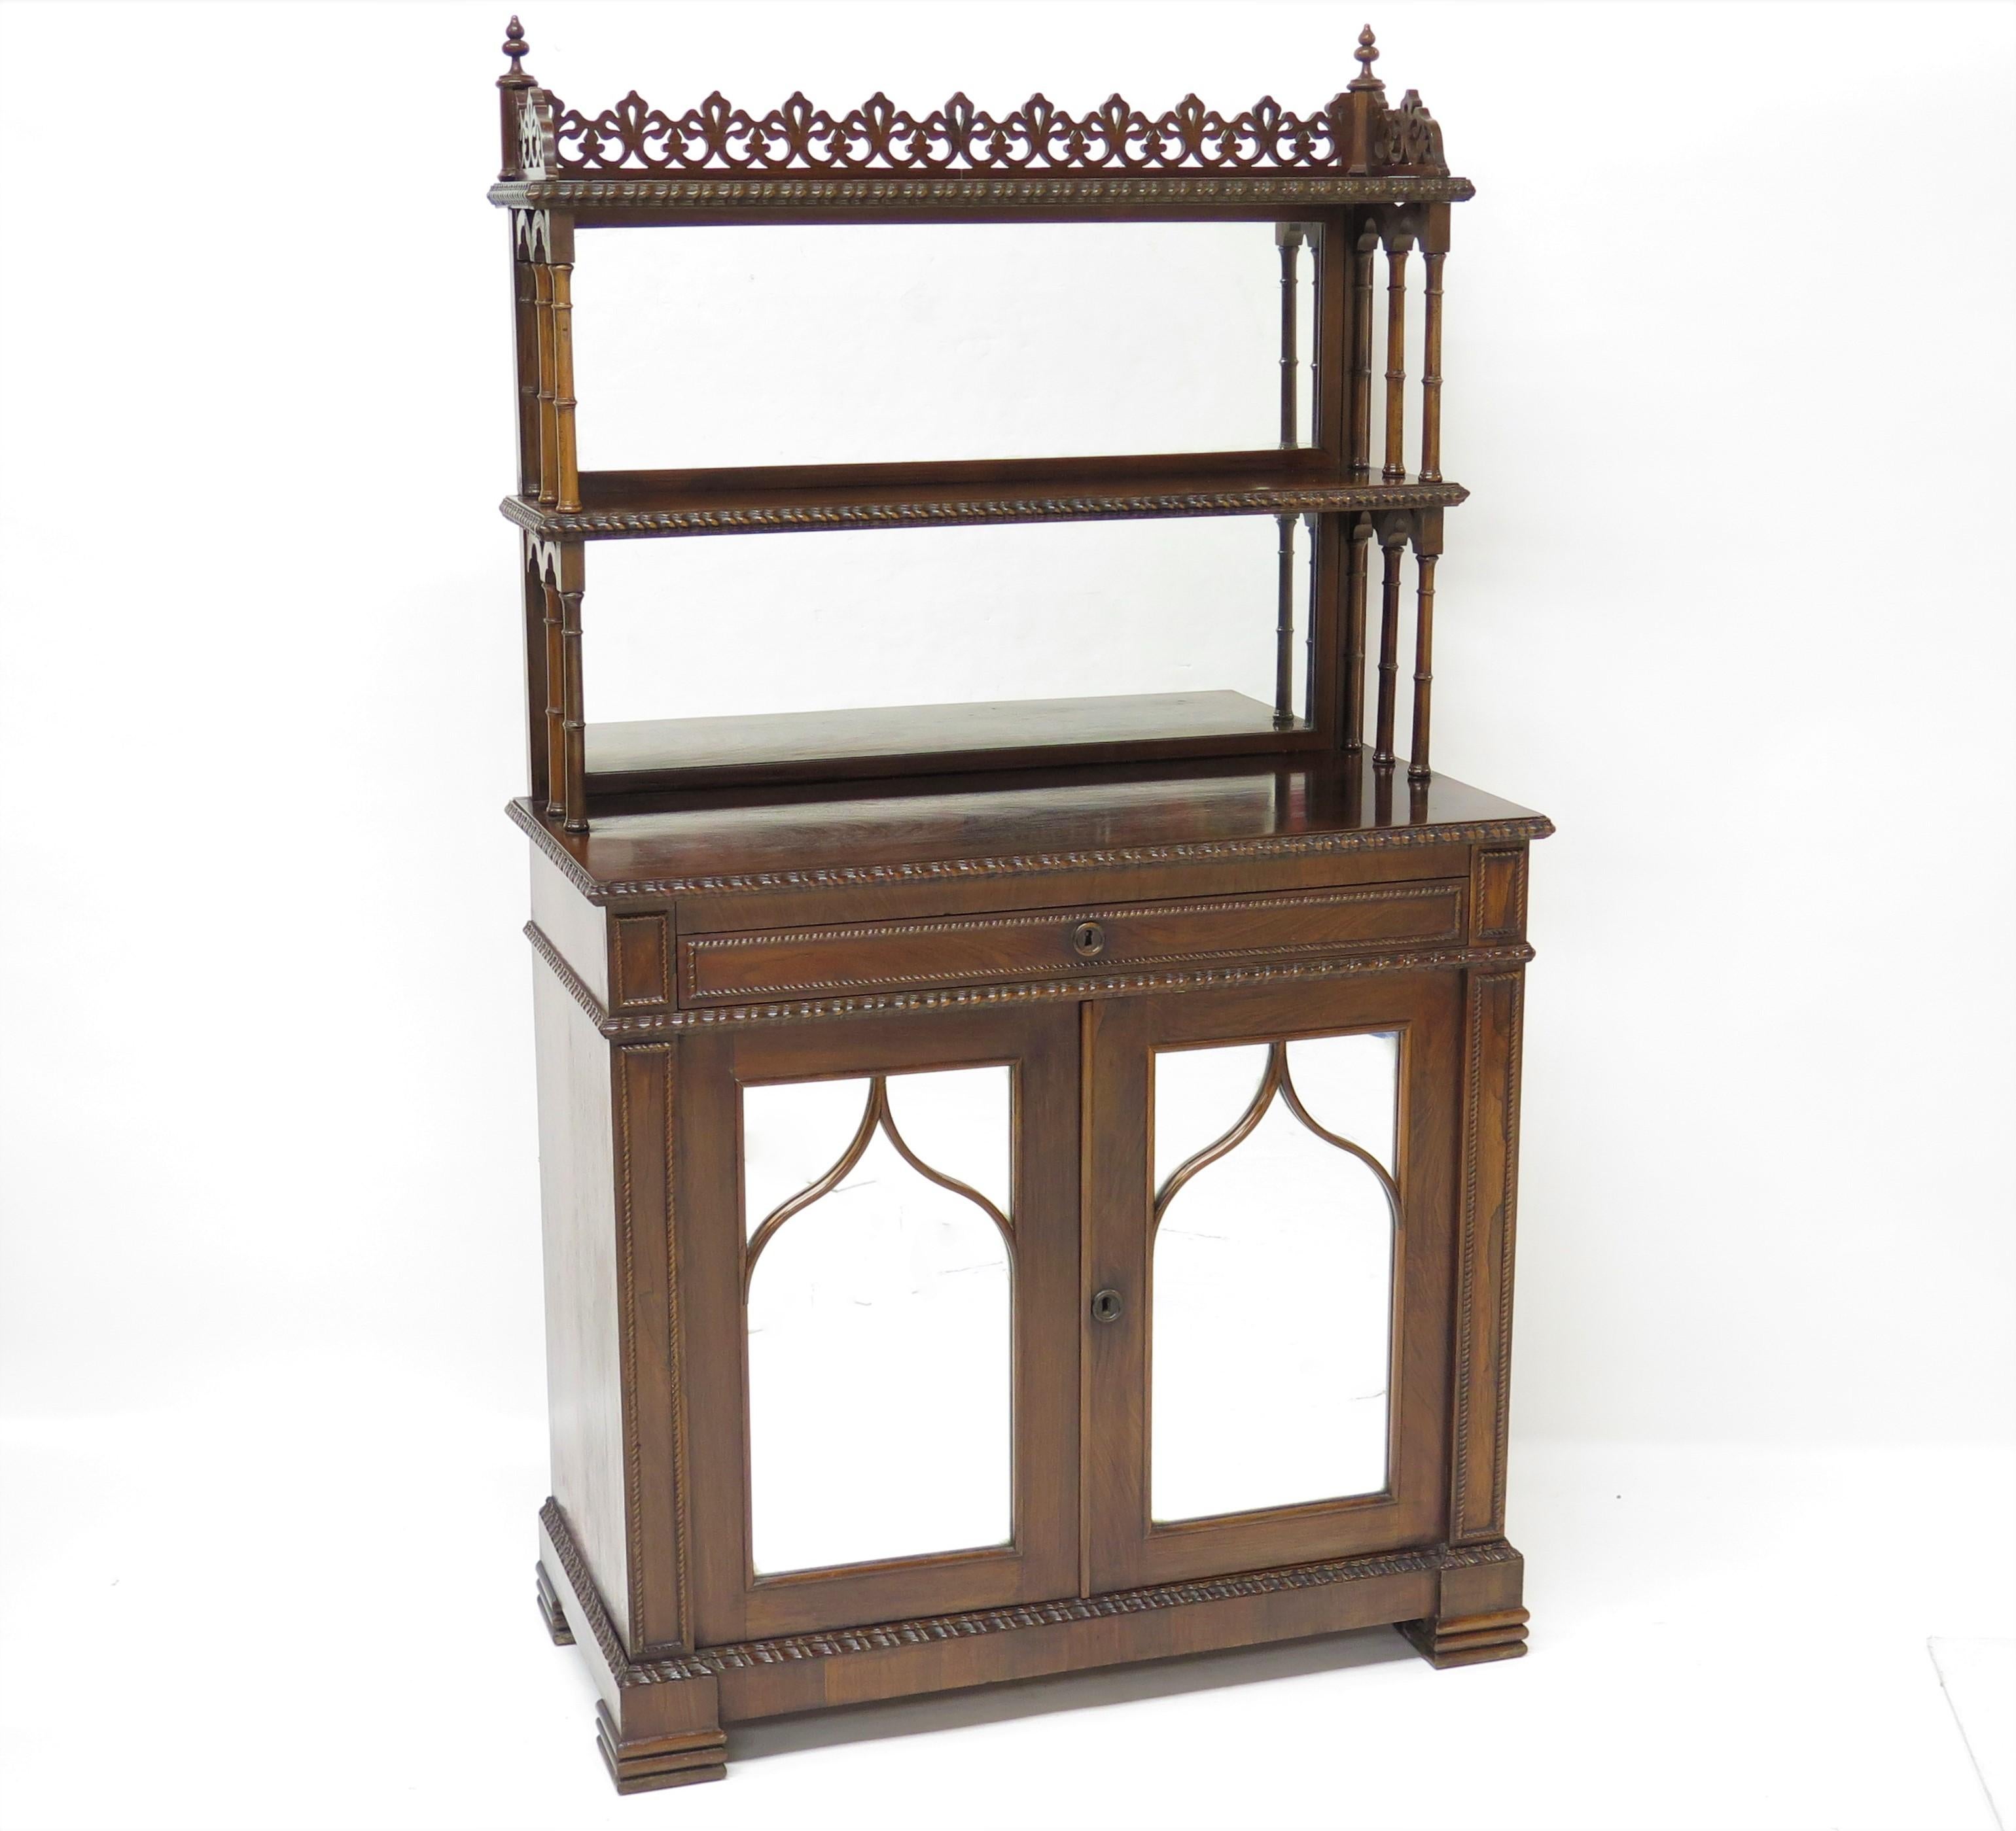 An English regency rosewood chiffonier bookcase or bar decorated in the gothic manner. England. Circa 1820